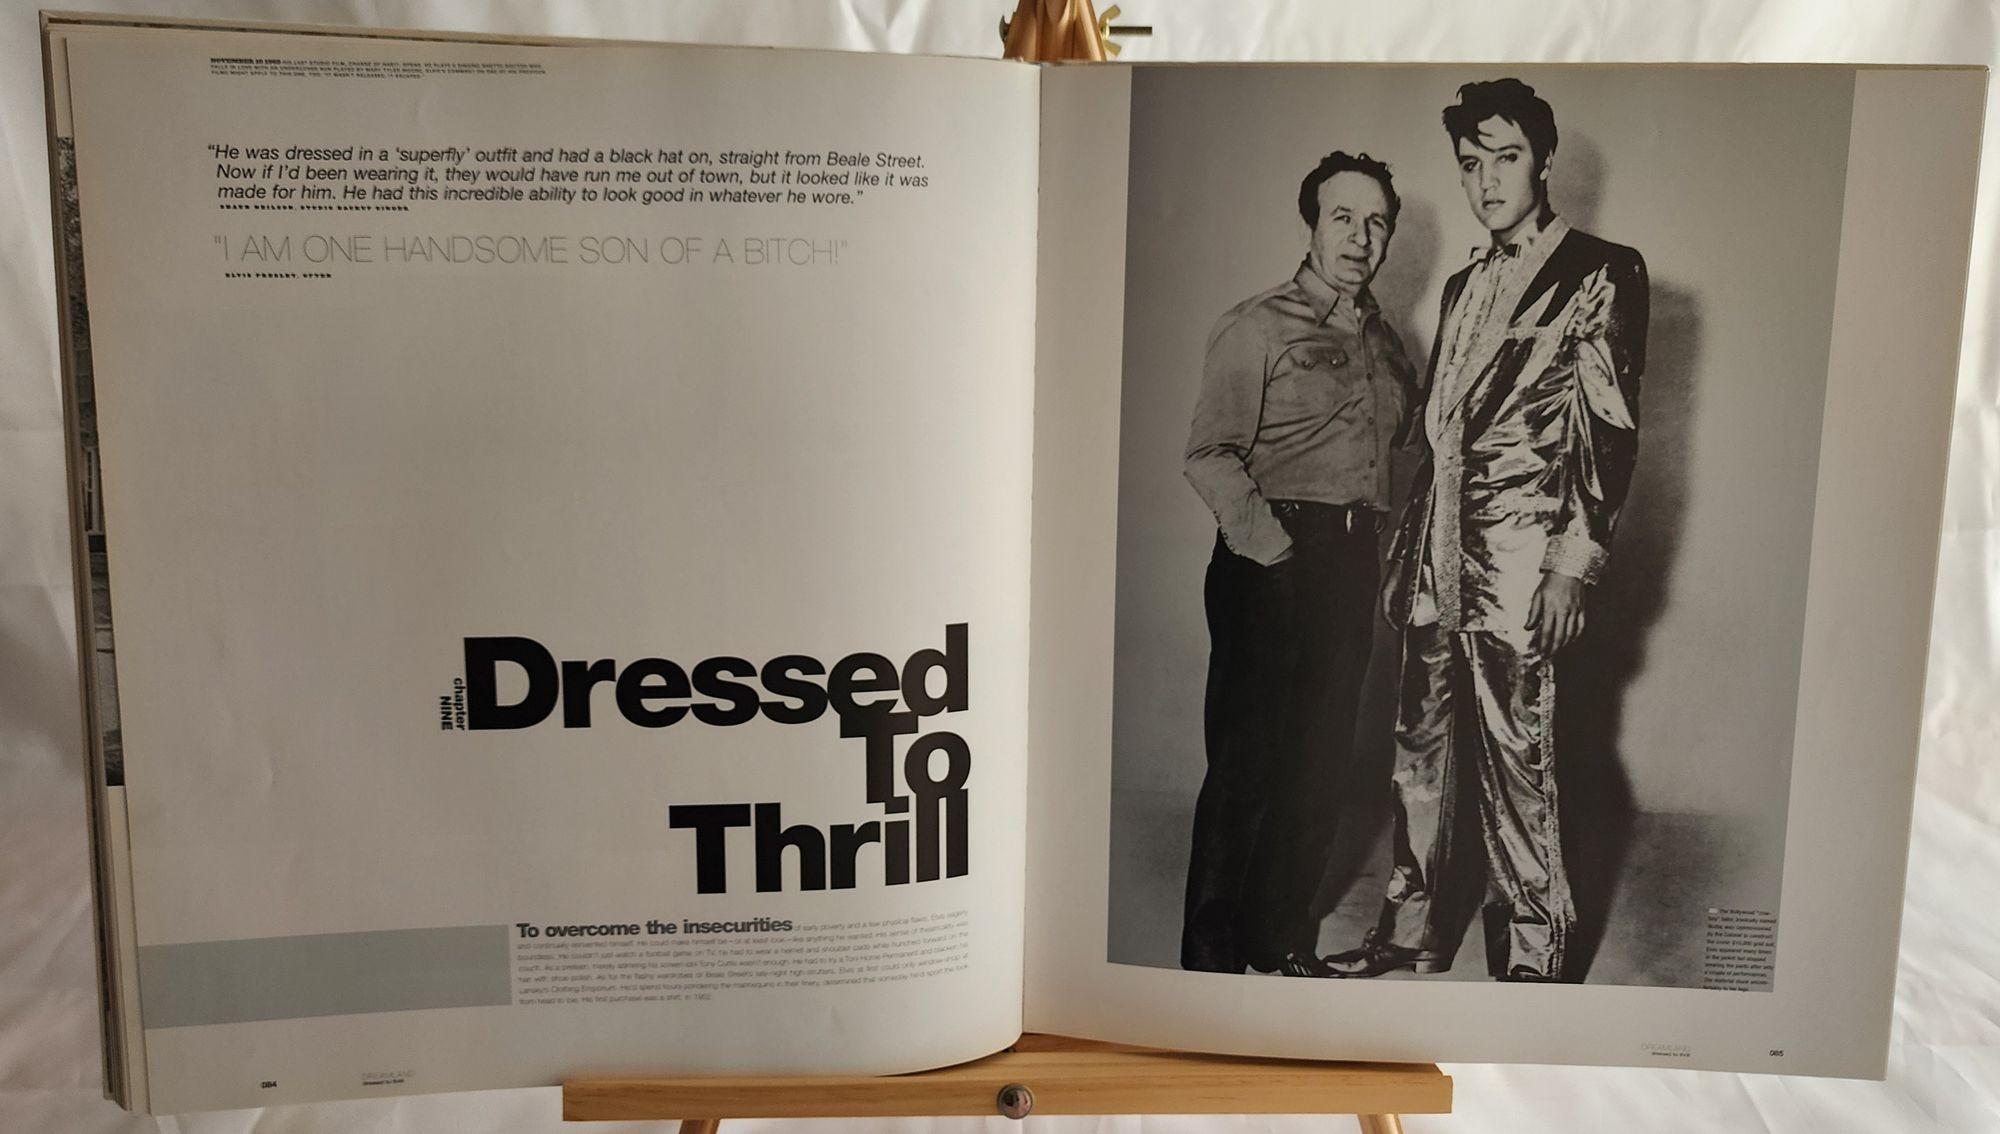 Paper The King by Jim Piazza Elvis Presley - Large size coffee table book For Sale